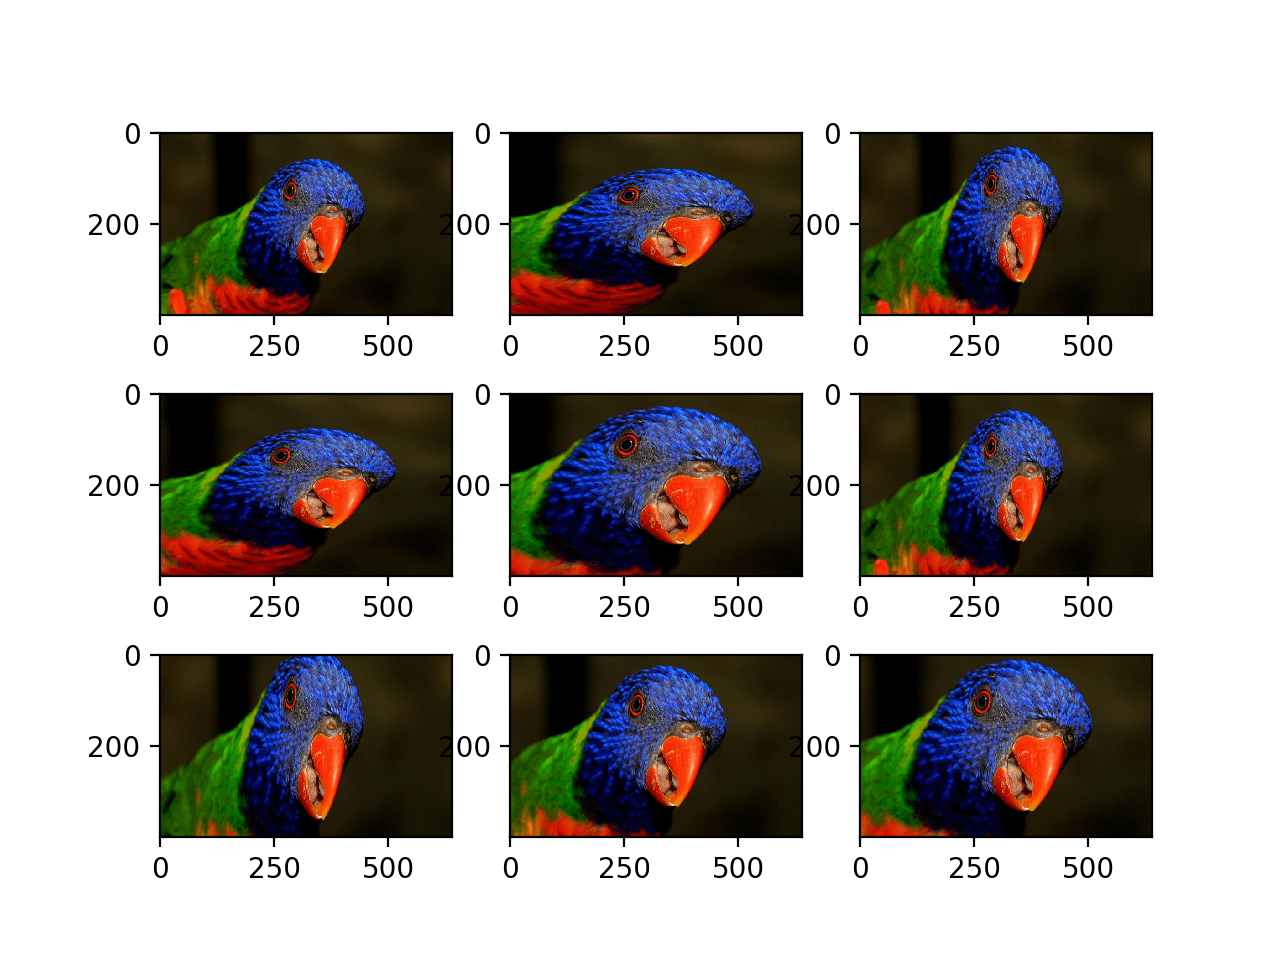 Plot of Images Generated With a Random Zoom Augmentation